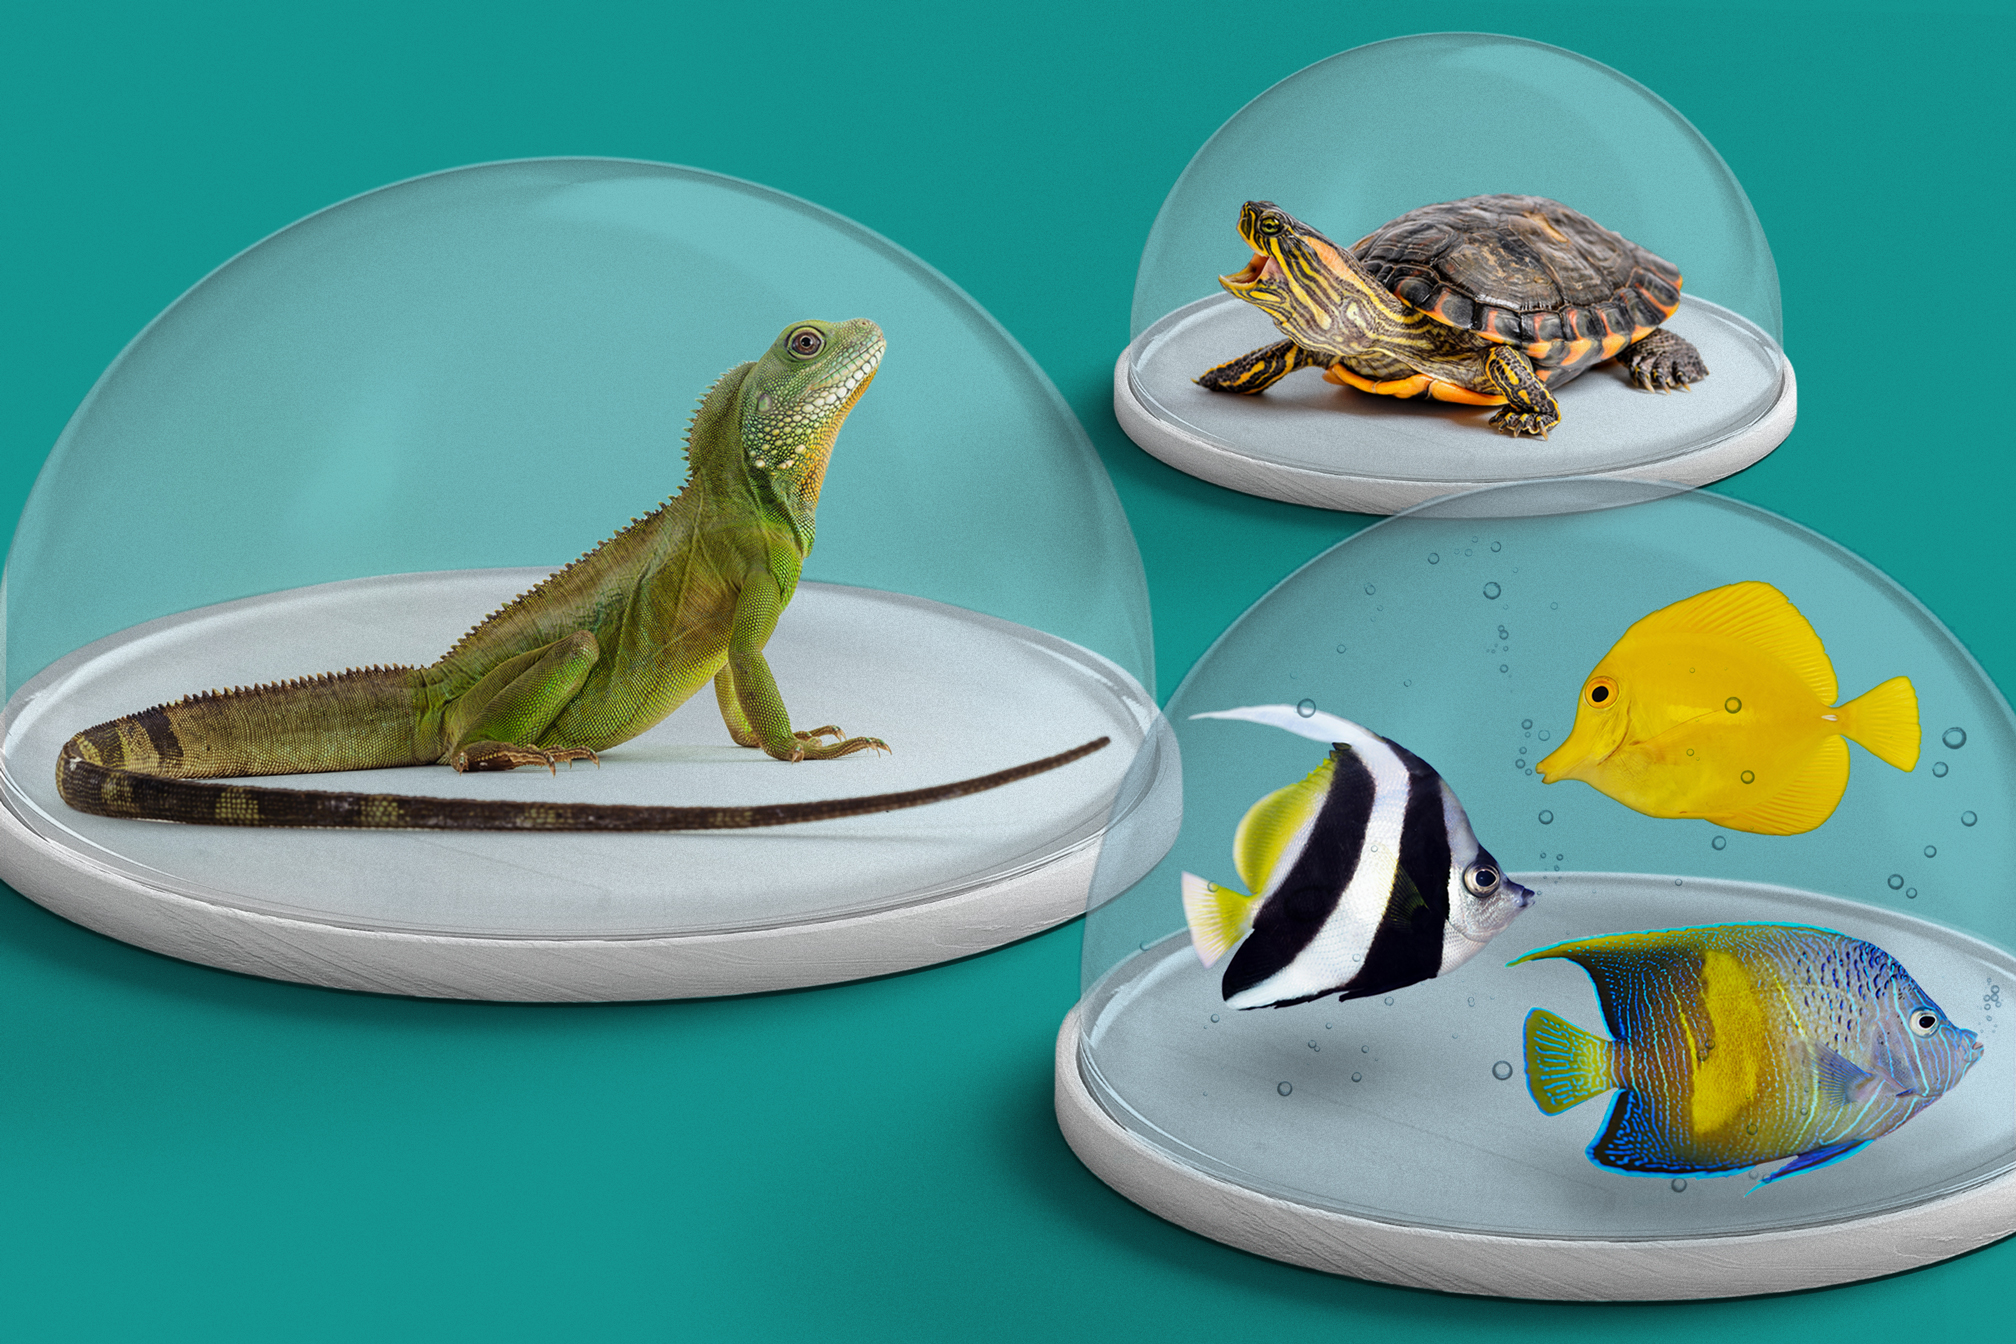 Yes, Pet Fish and Reptiles Get Sick. There's Even Insurance to Cover Their Vet Visits